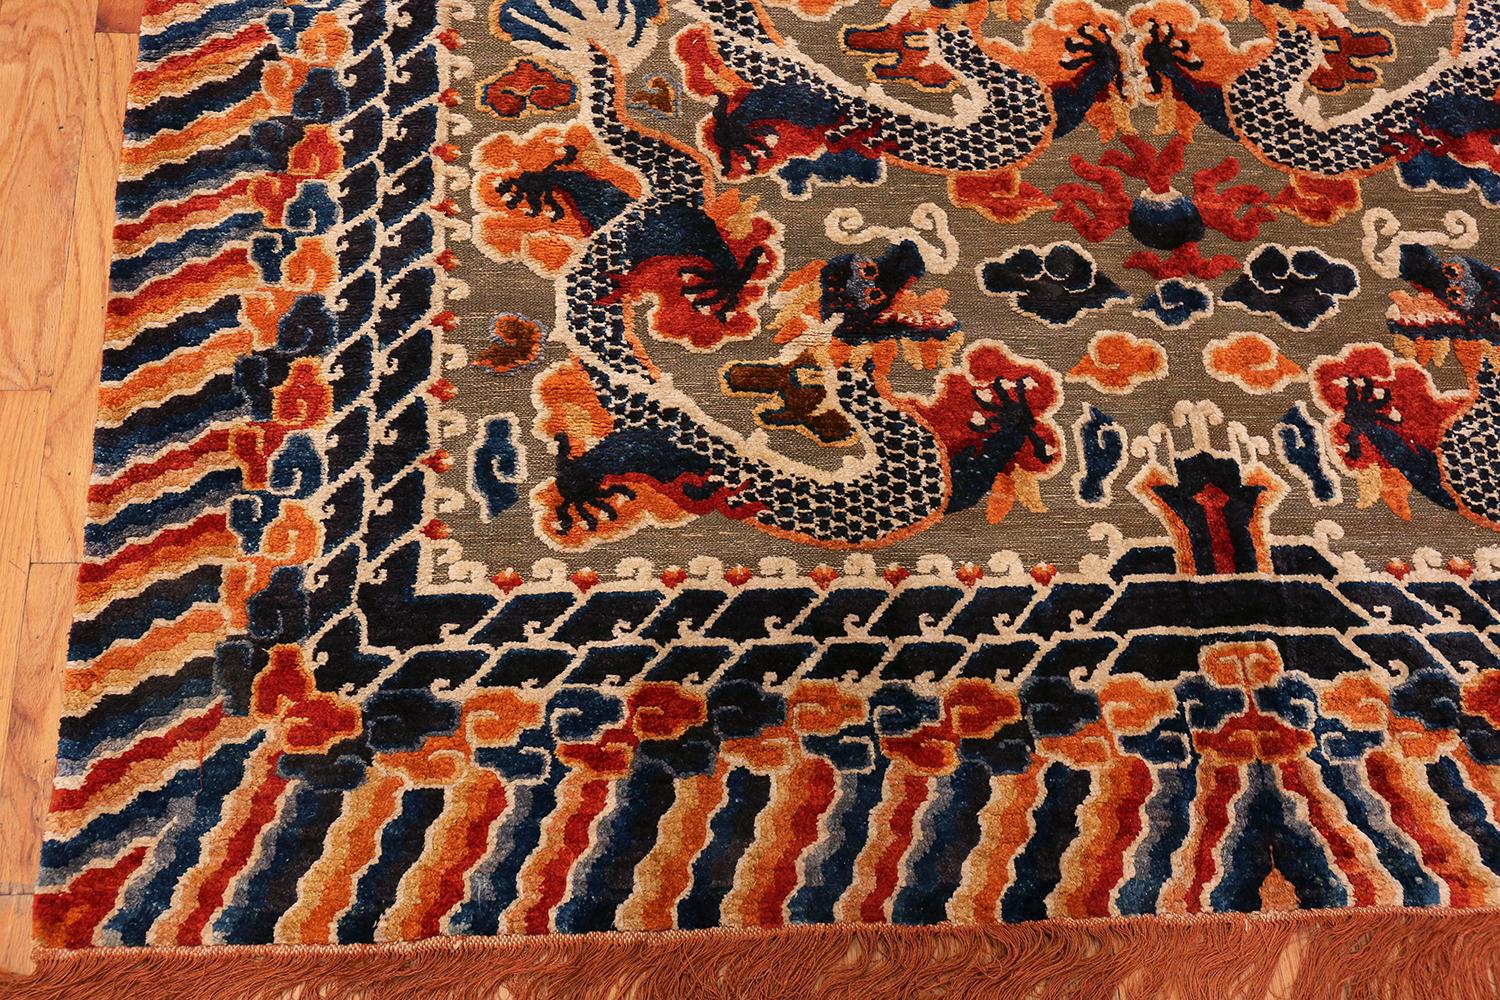 Hand-Knotted Collectible Antique Silk and Metallic Thread Chinese Dragon Rug. 6 ft x 9 ft 3in